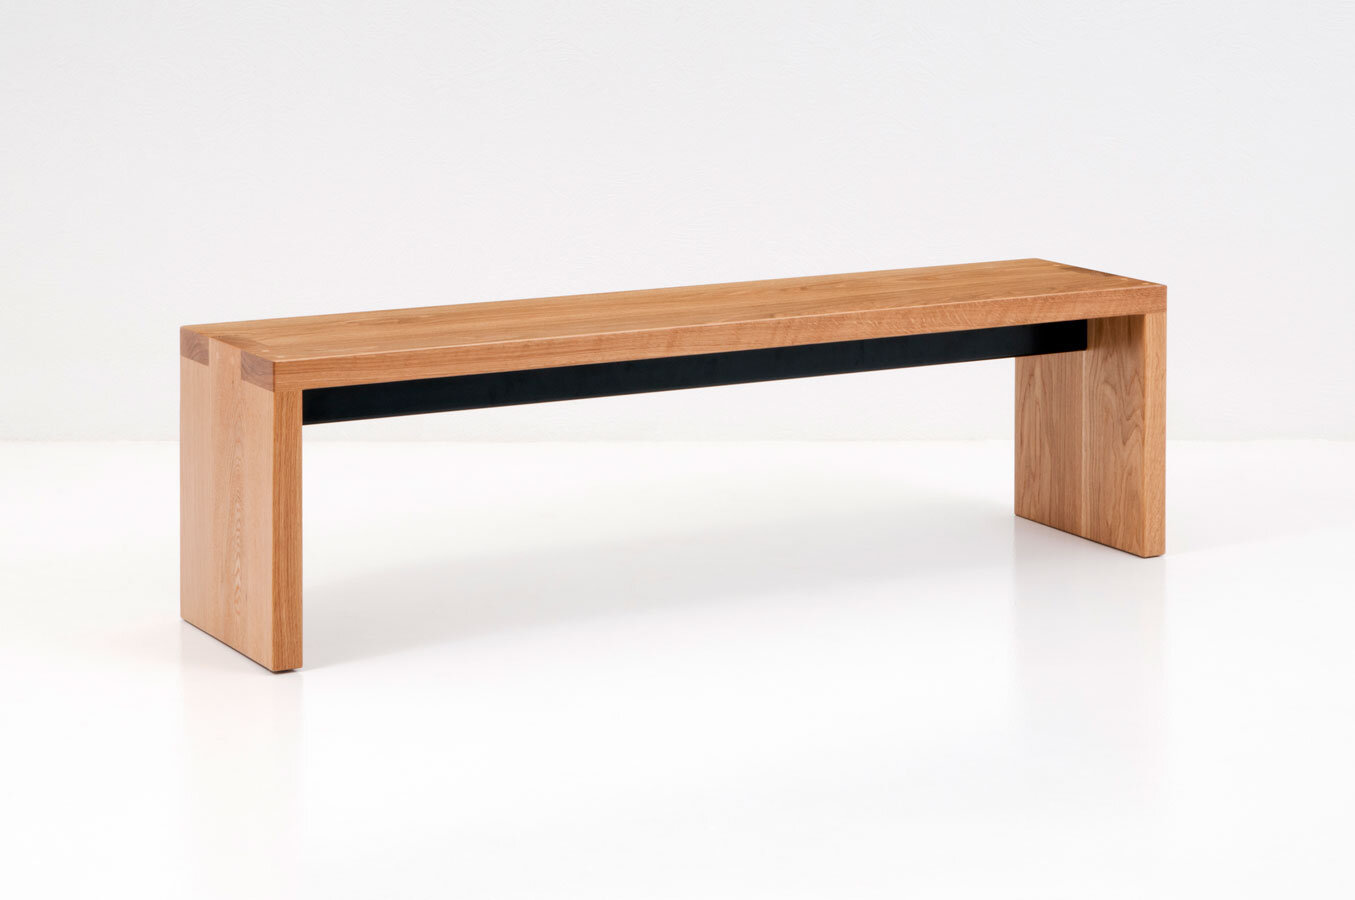  Furniture For Avenues - Solid Oak Dining Bench 